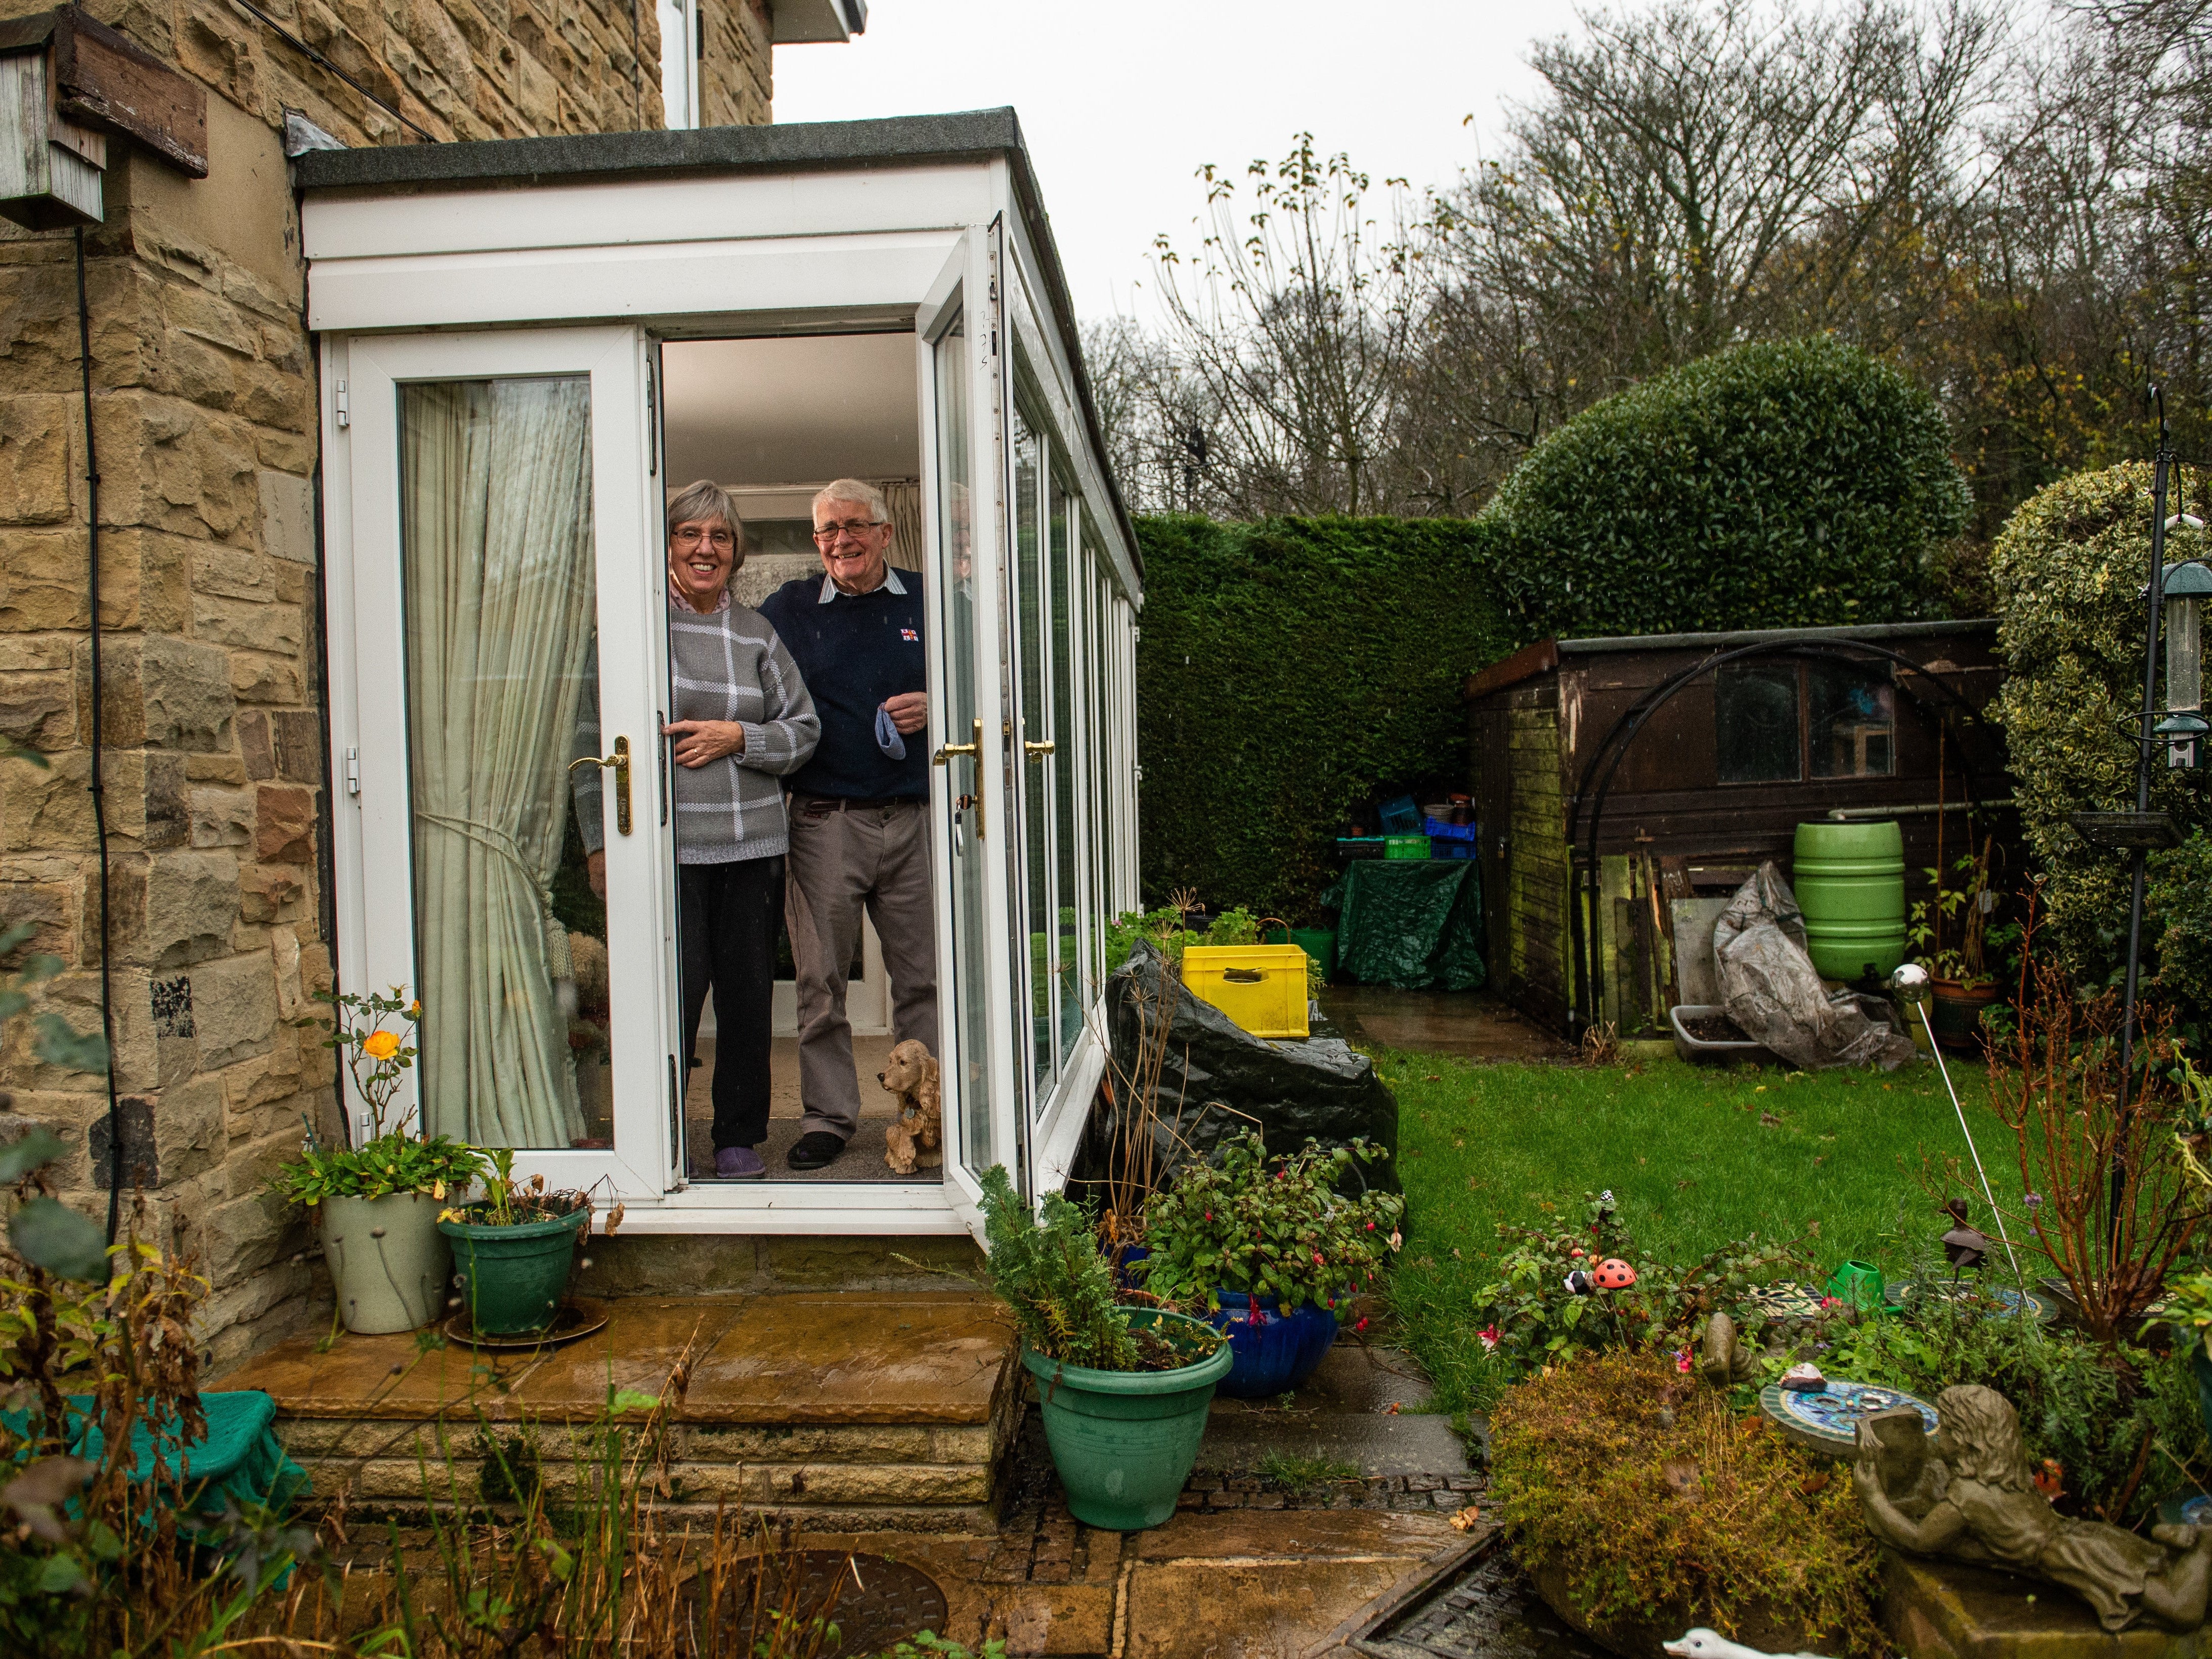 Sheila and Philip Herbert at their home in Otley, near Leeds